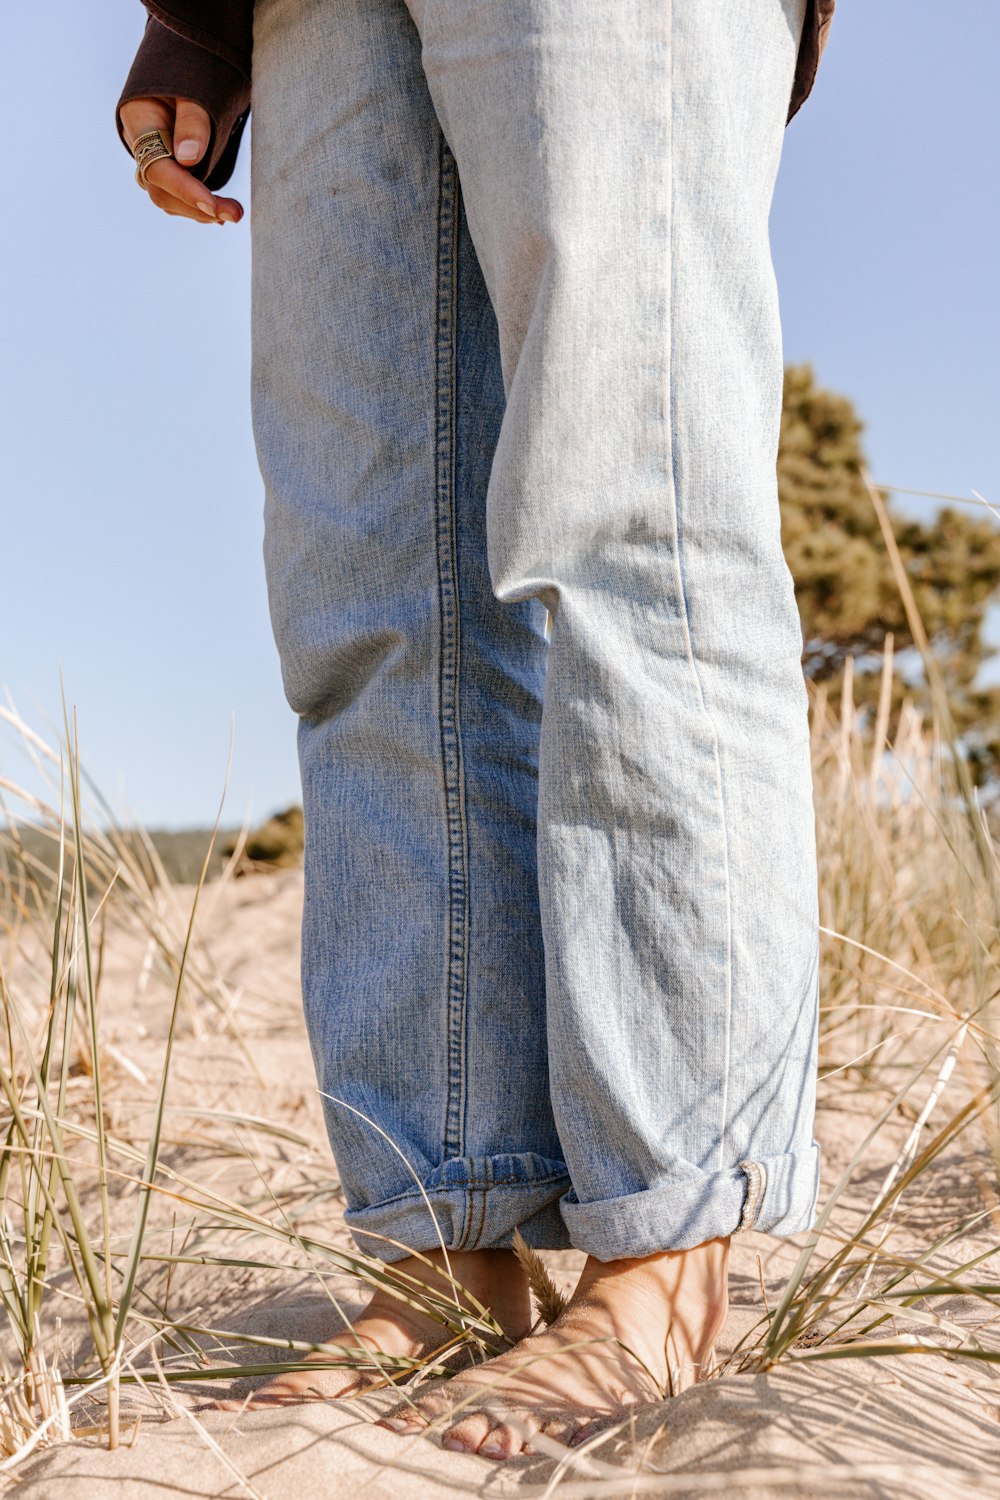 person in blue denim jeans standing on brown grass field during daytime